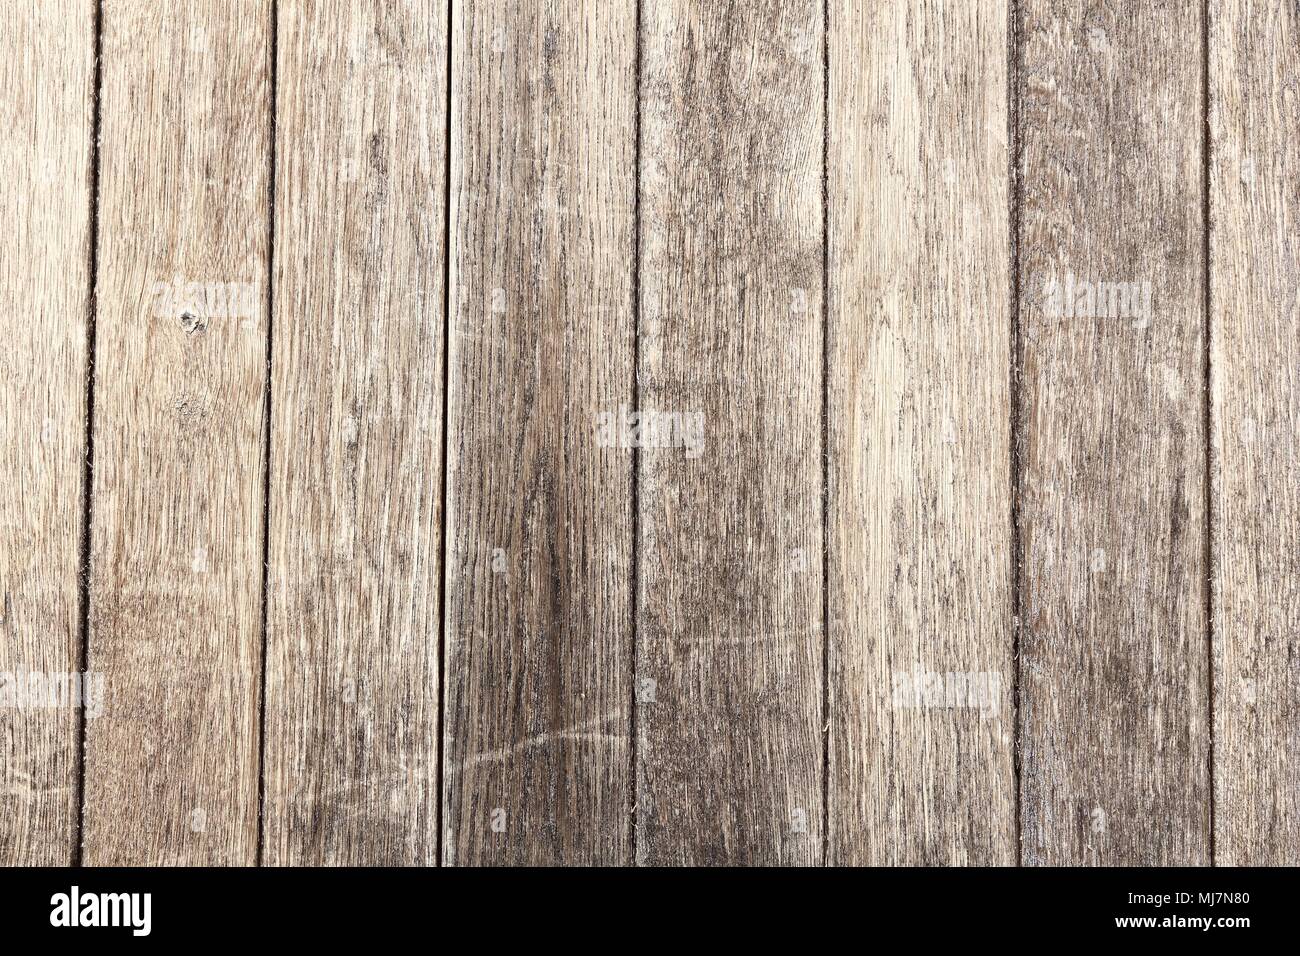 Old wood texture with natural patterns. Wooden door background. Stock Photo